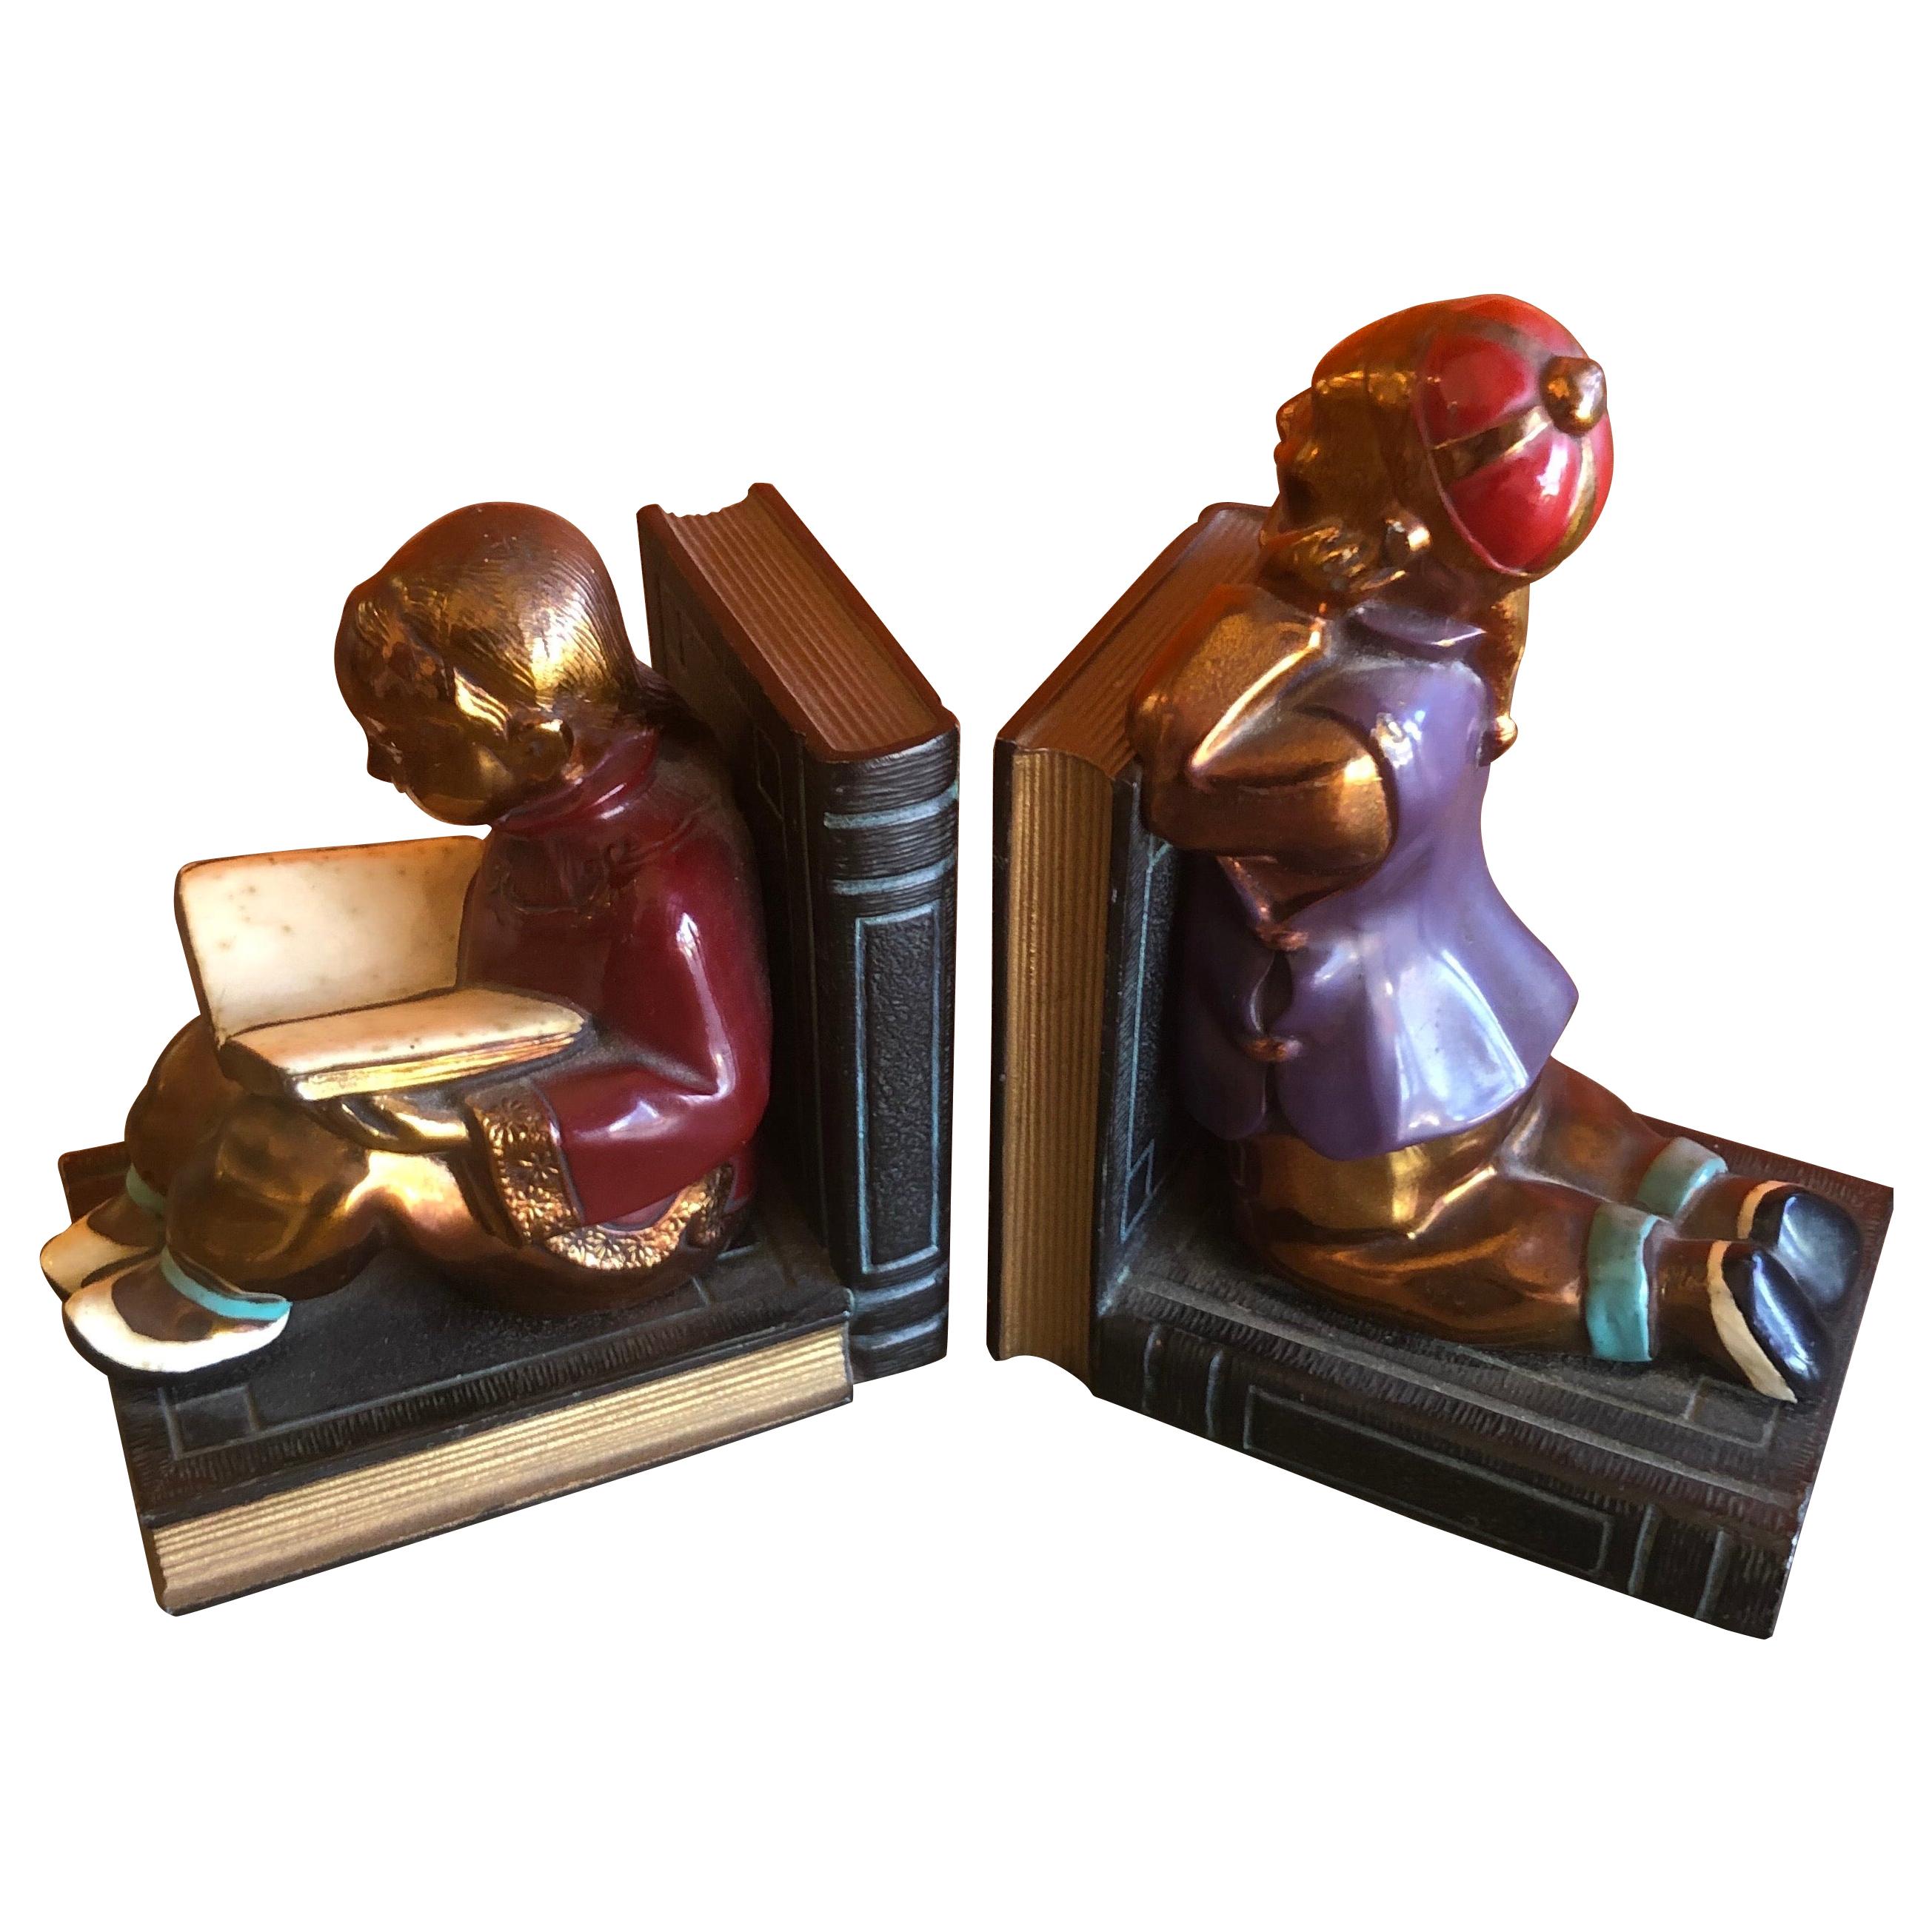 Pair of Metal Clad Art Deco Bookends by Ronson Art Metal Works